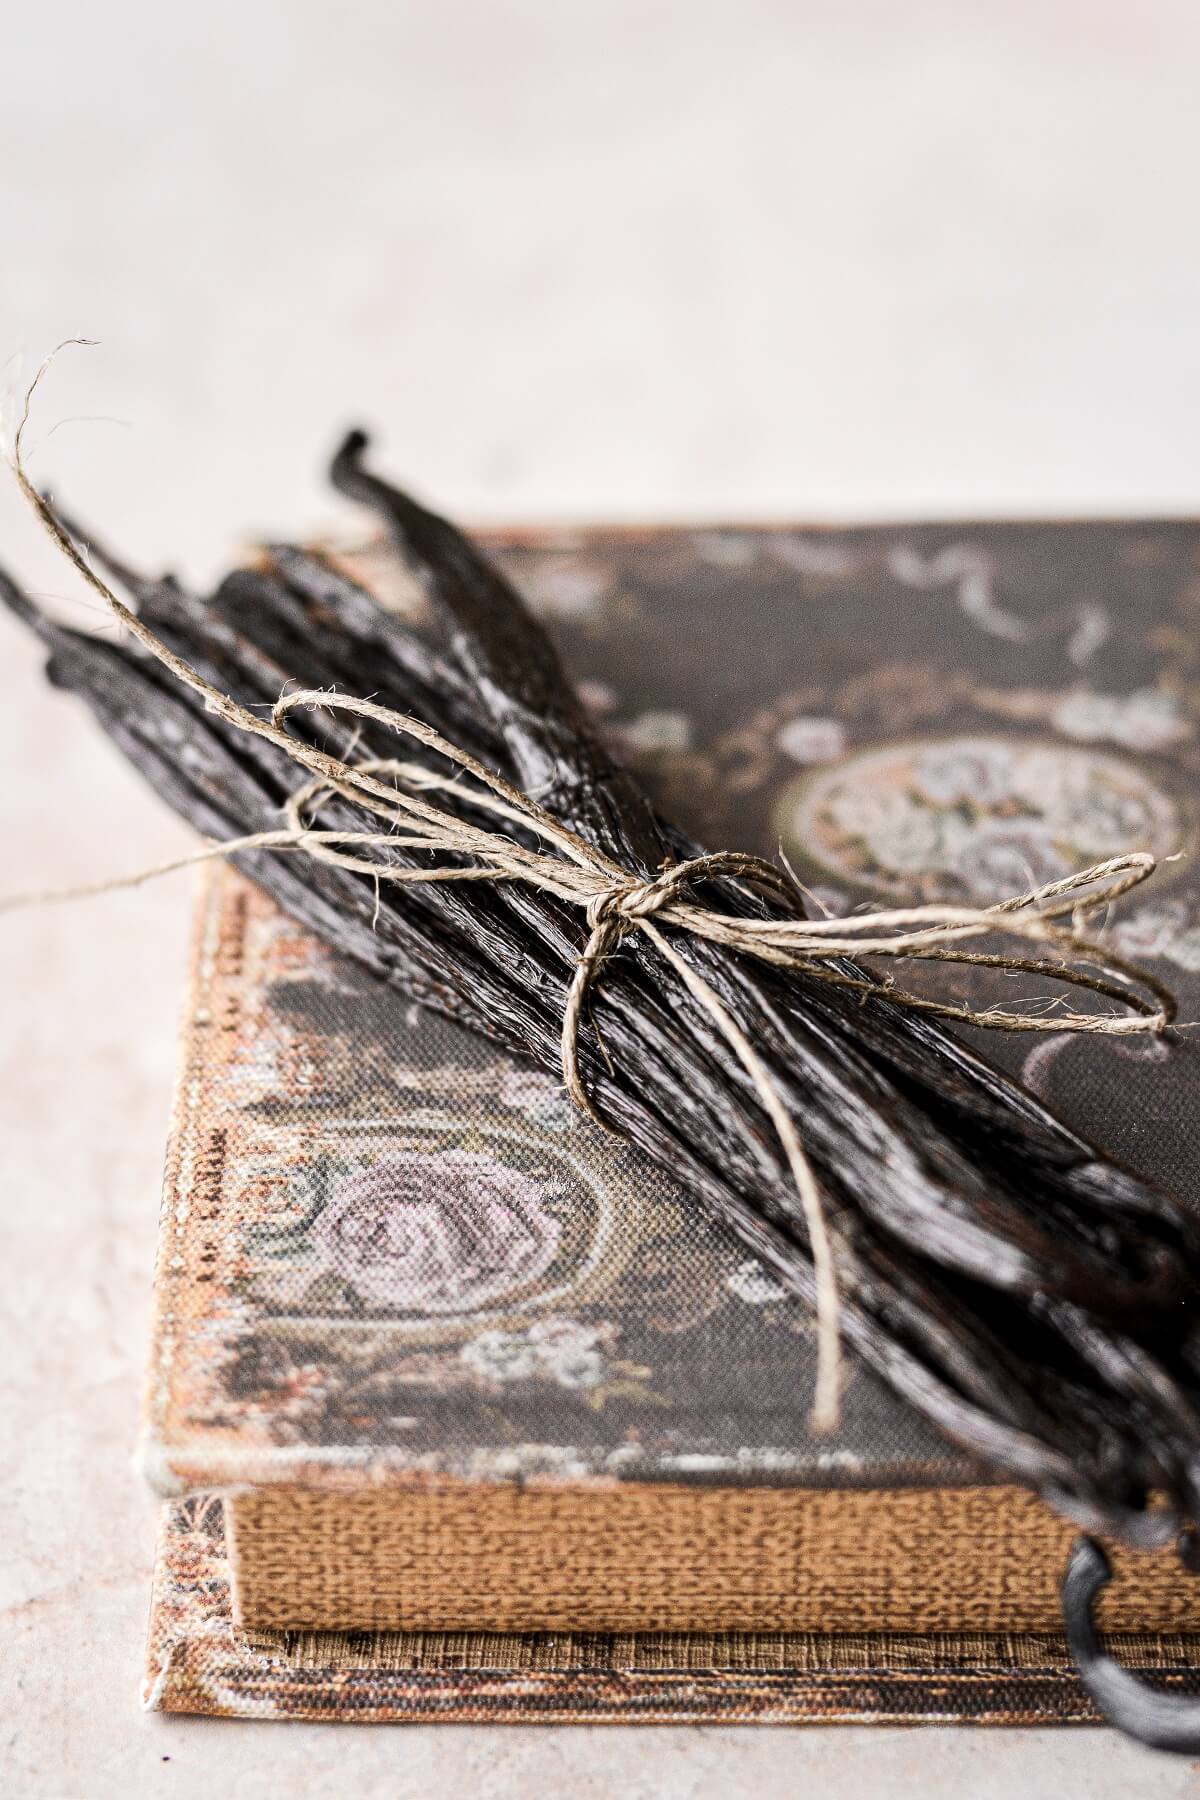 Vanilla beans tied with twine.